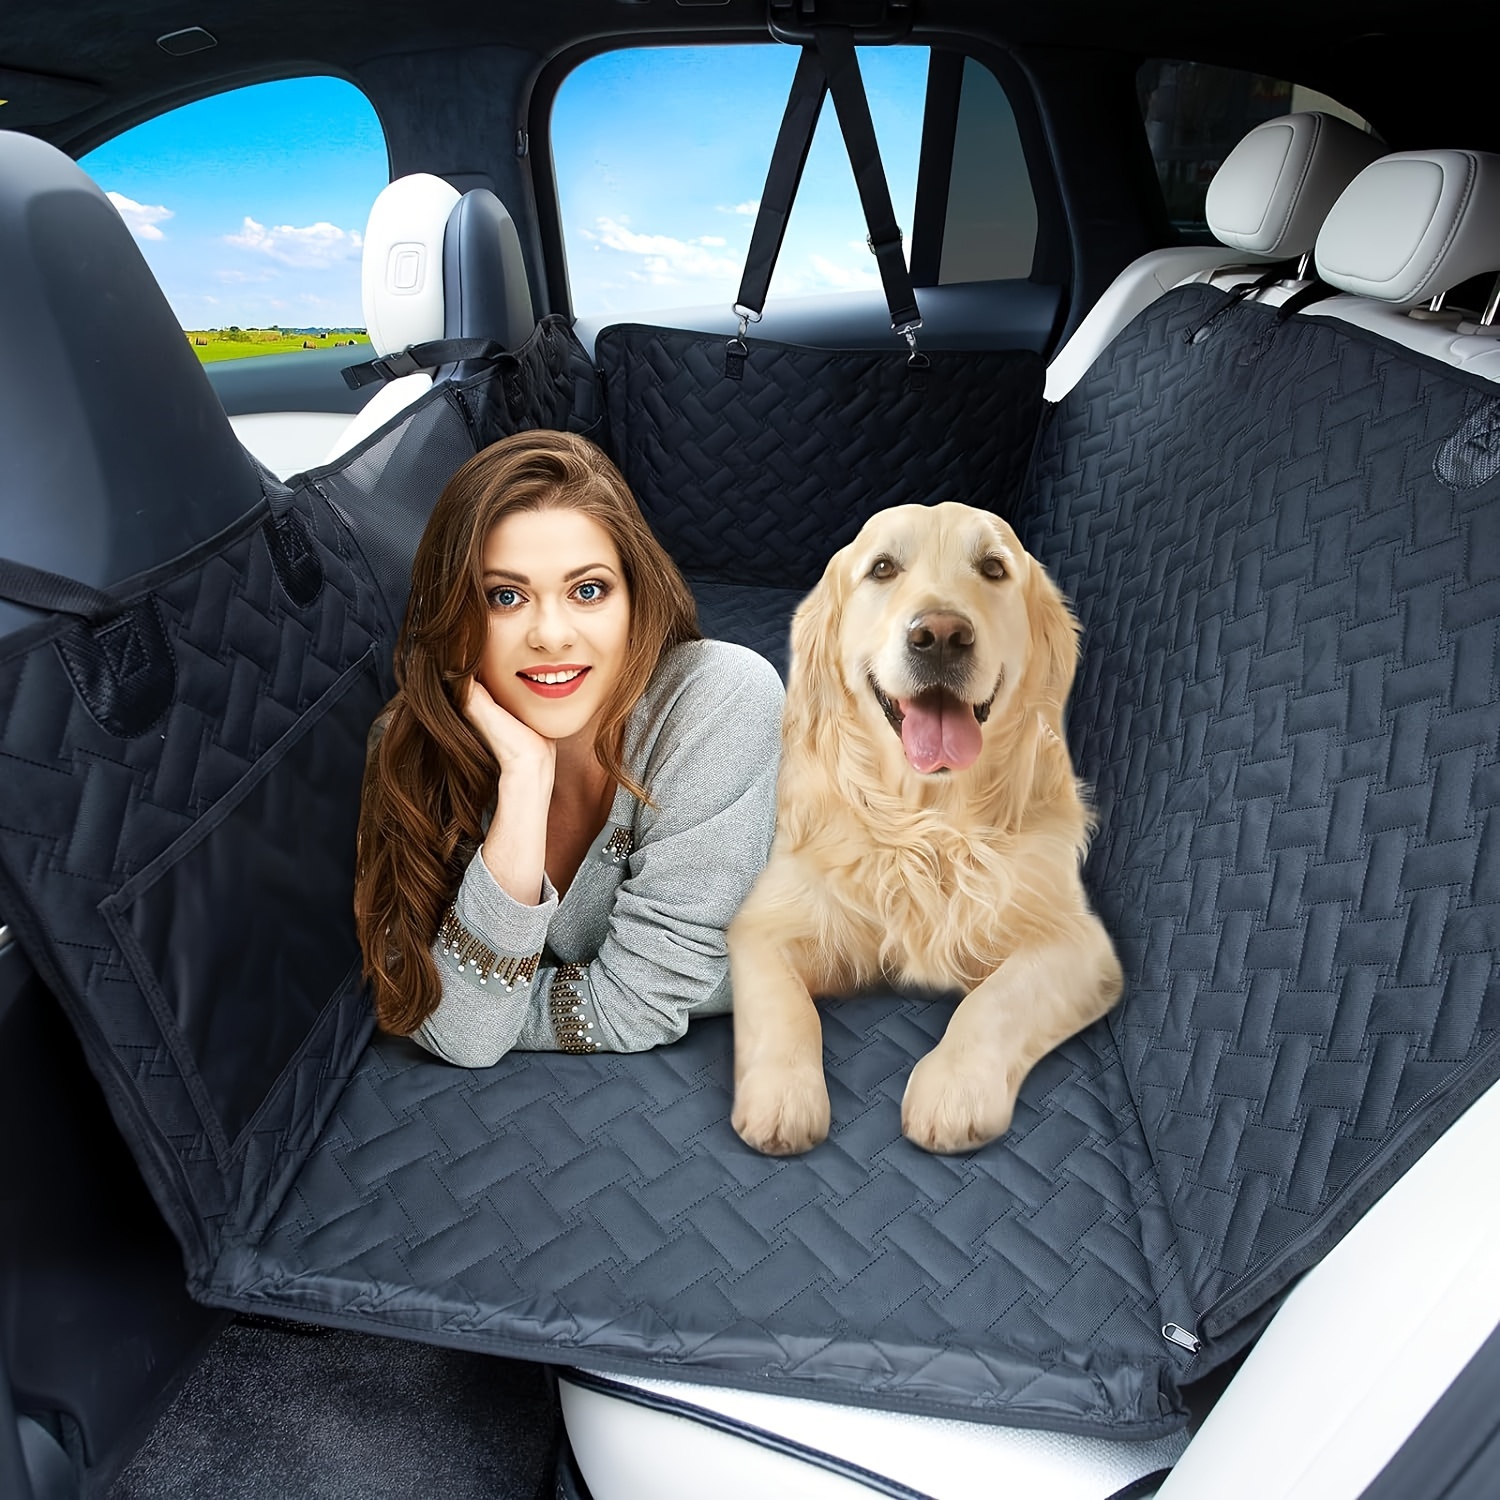 

Cemofe Back Seat Extender For Dogs, Hard Bottom Dog Car Seat Cover For Back Seat Protector, Waterproof Backseat Pet Cover For Dogs In Car, Dog Car Seat Bed Dog Hammock For Car Suv Truck